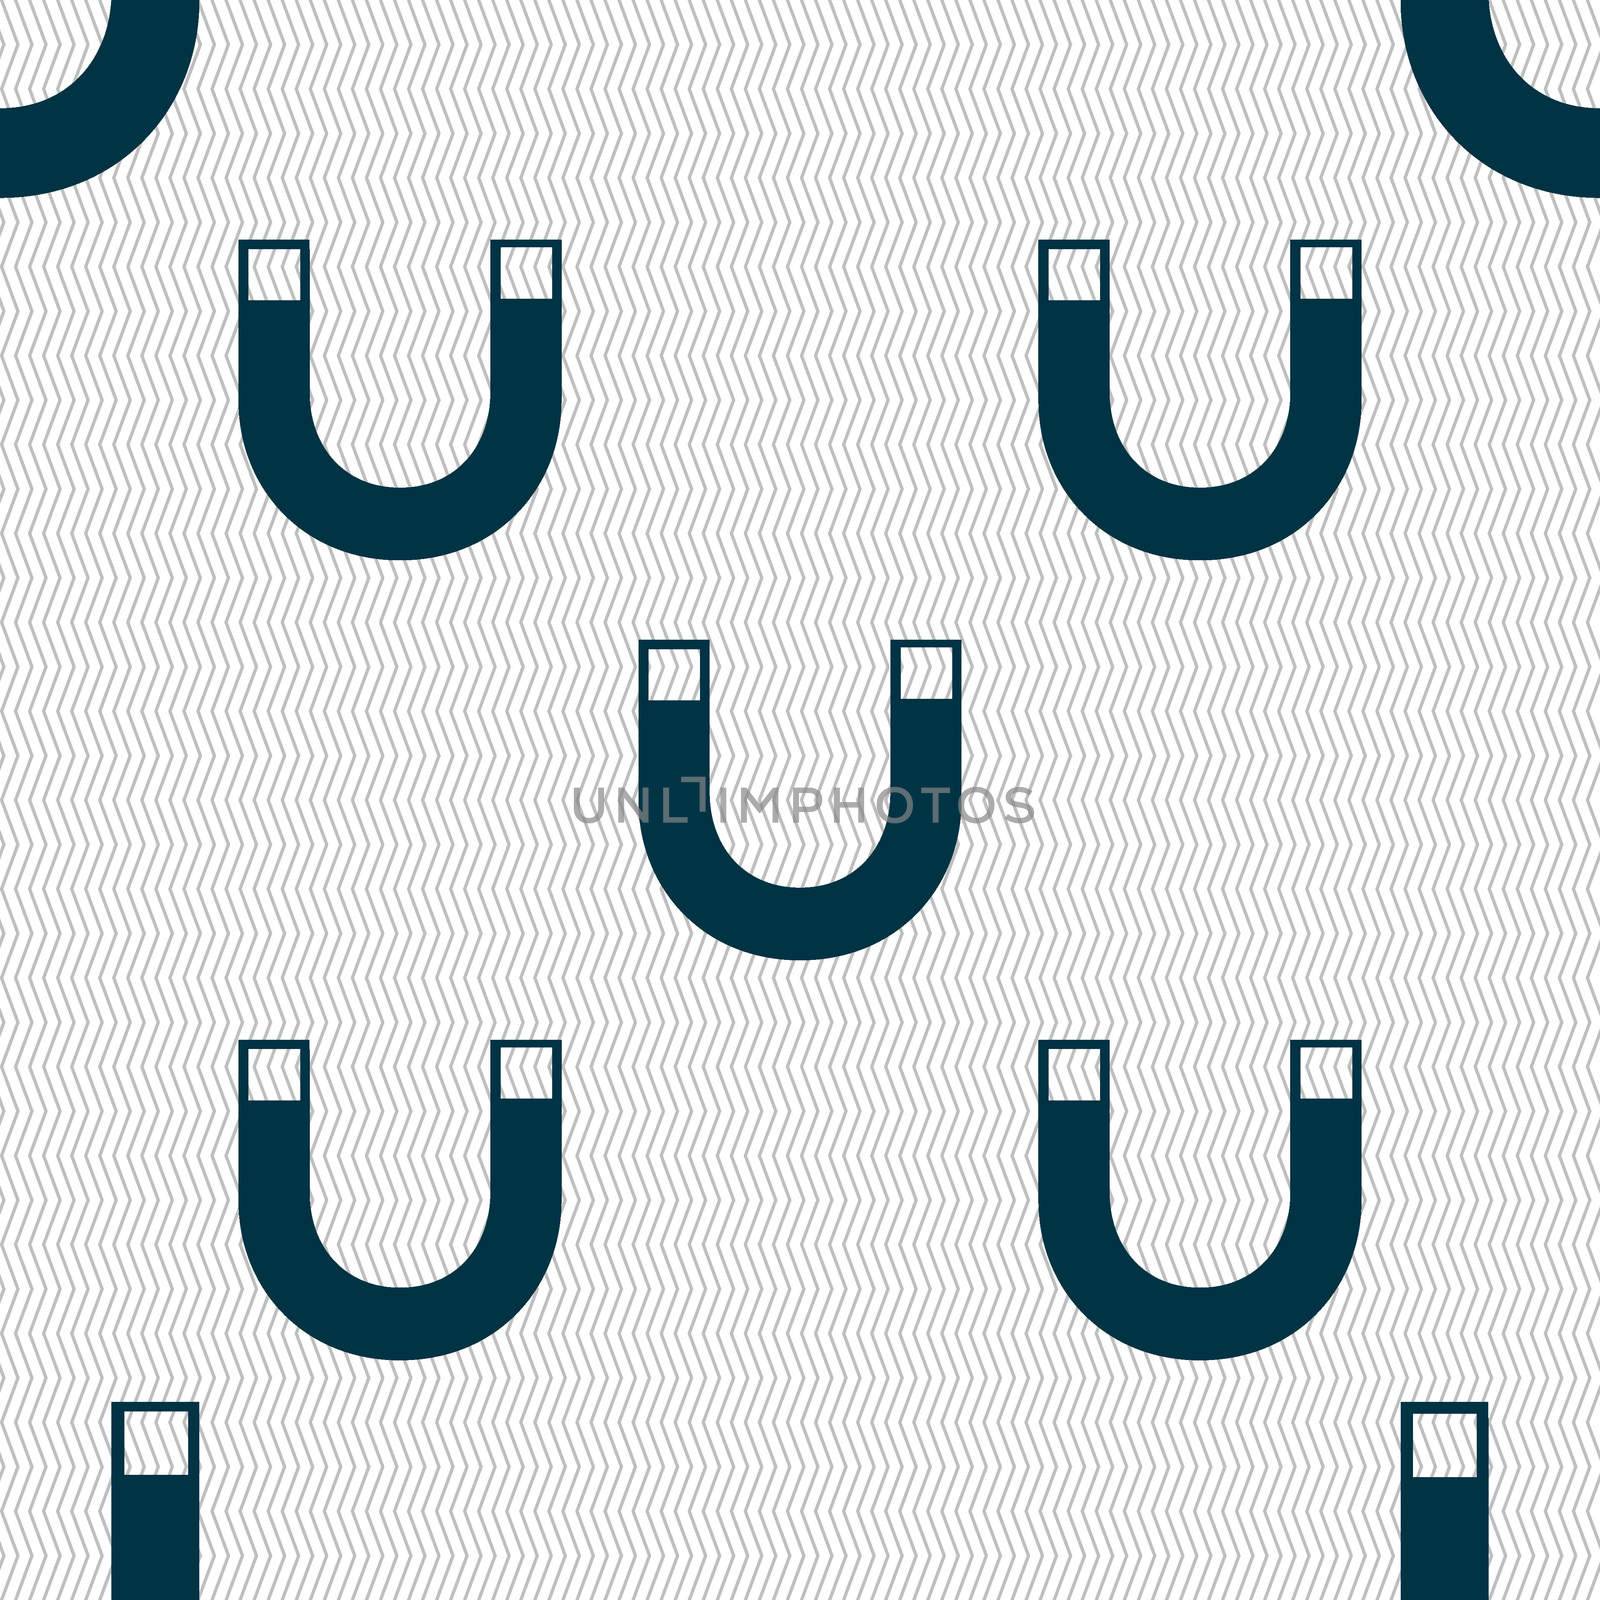 magnet sign icon. horseshoe it symbol. Repair sig. Seamless abstract background with geometric shapes.  by serhii_lohvyniuk